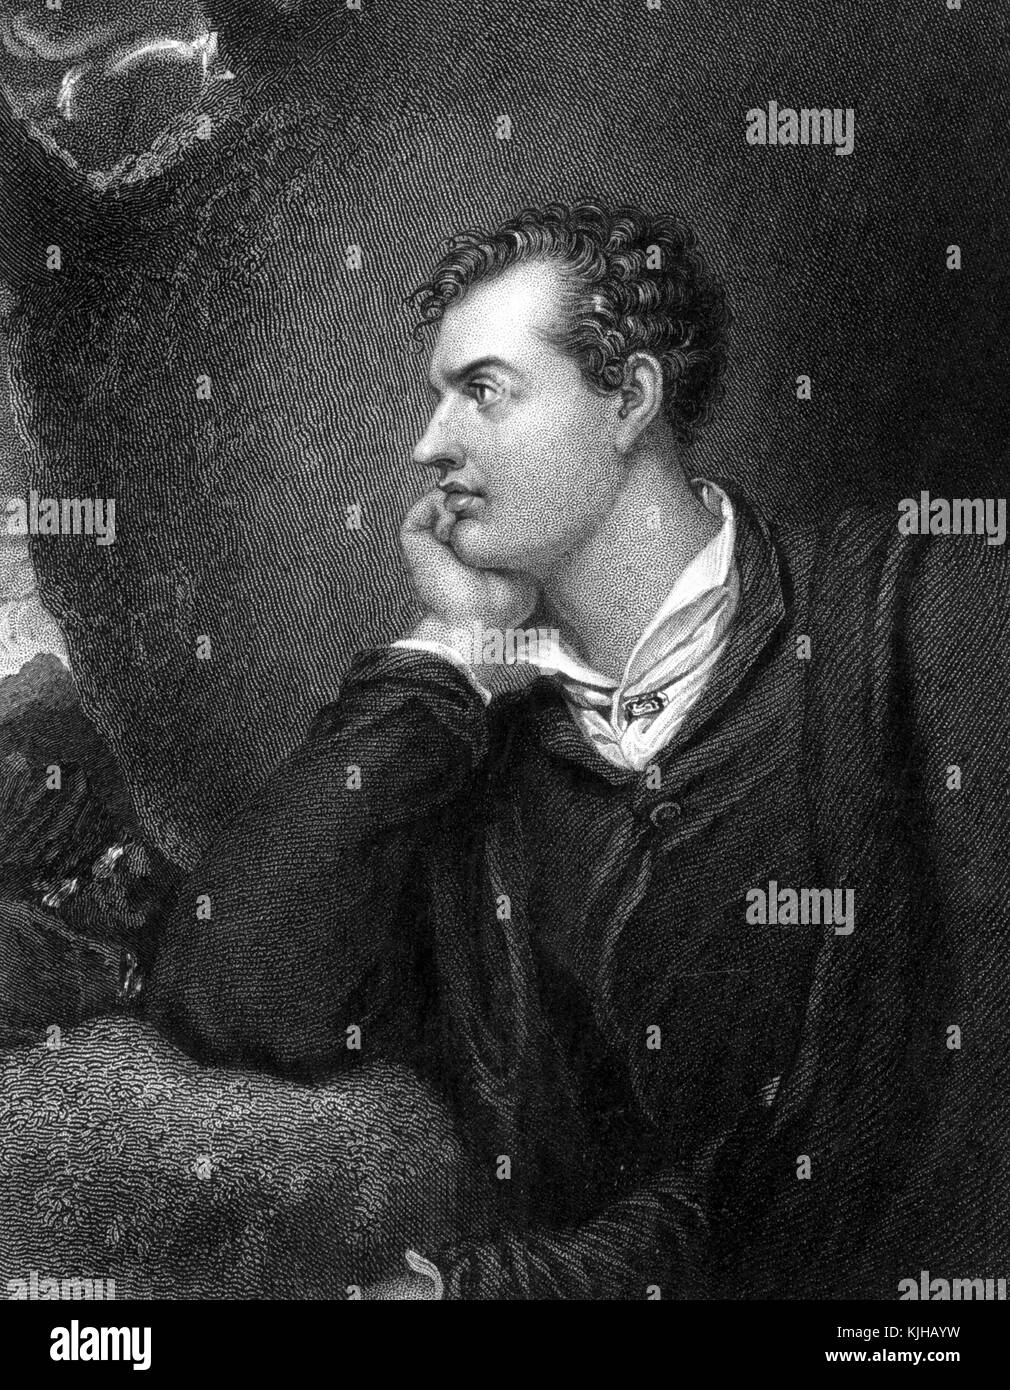 An engraving from a portrait of Lord Byron, he is shown in a pensive posture with his head rested against his hand, he is looking in to the distance, he was an English poet whose works remain popular throughout the world, he was a prominent figure in the Romantic Movement, he was known for living in excess, stories about him surrounded his life filled with love affairs with men and women along with huge debts, he is considered a hero in Greece for fighting alongside them against the Ottoman Empire, he died at age 36, 1880. From the New York Public Library. Stock Photo